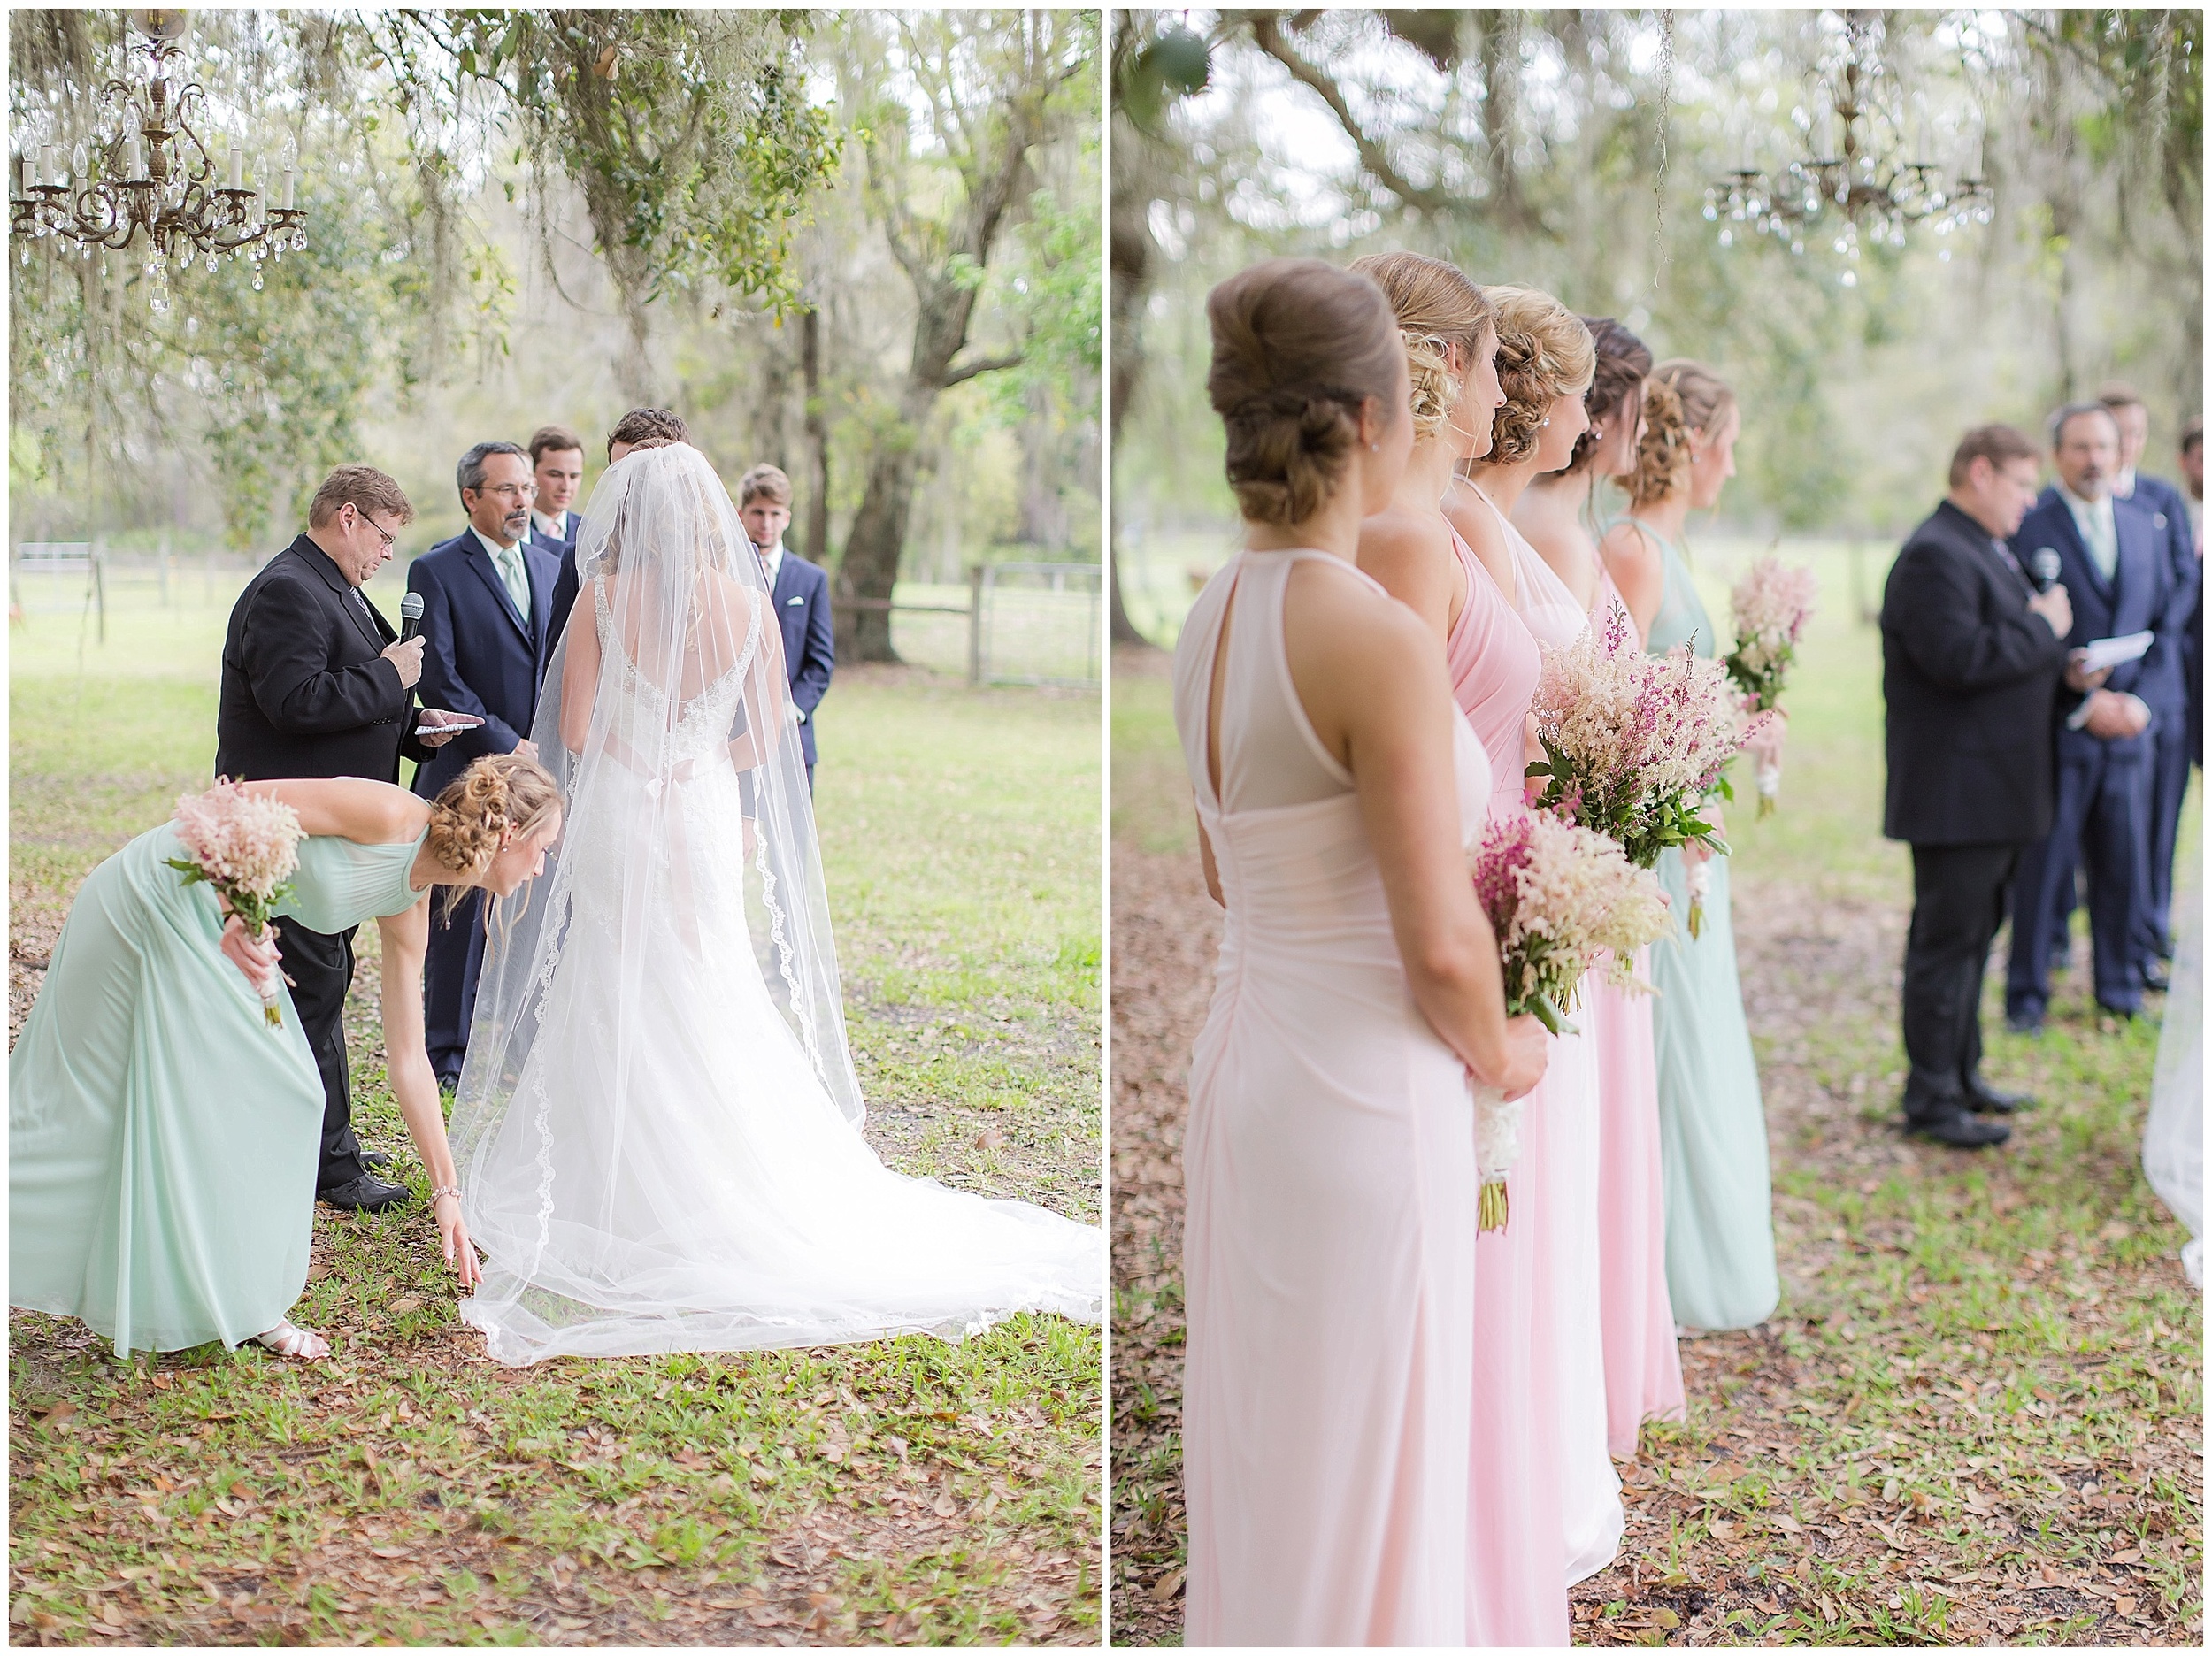 Romantic Outdoor Ceremony with a beautiful Sweetheart Embellished dress.